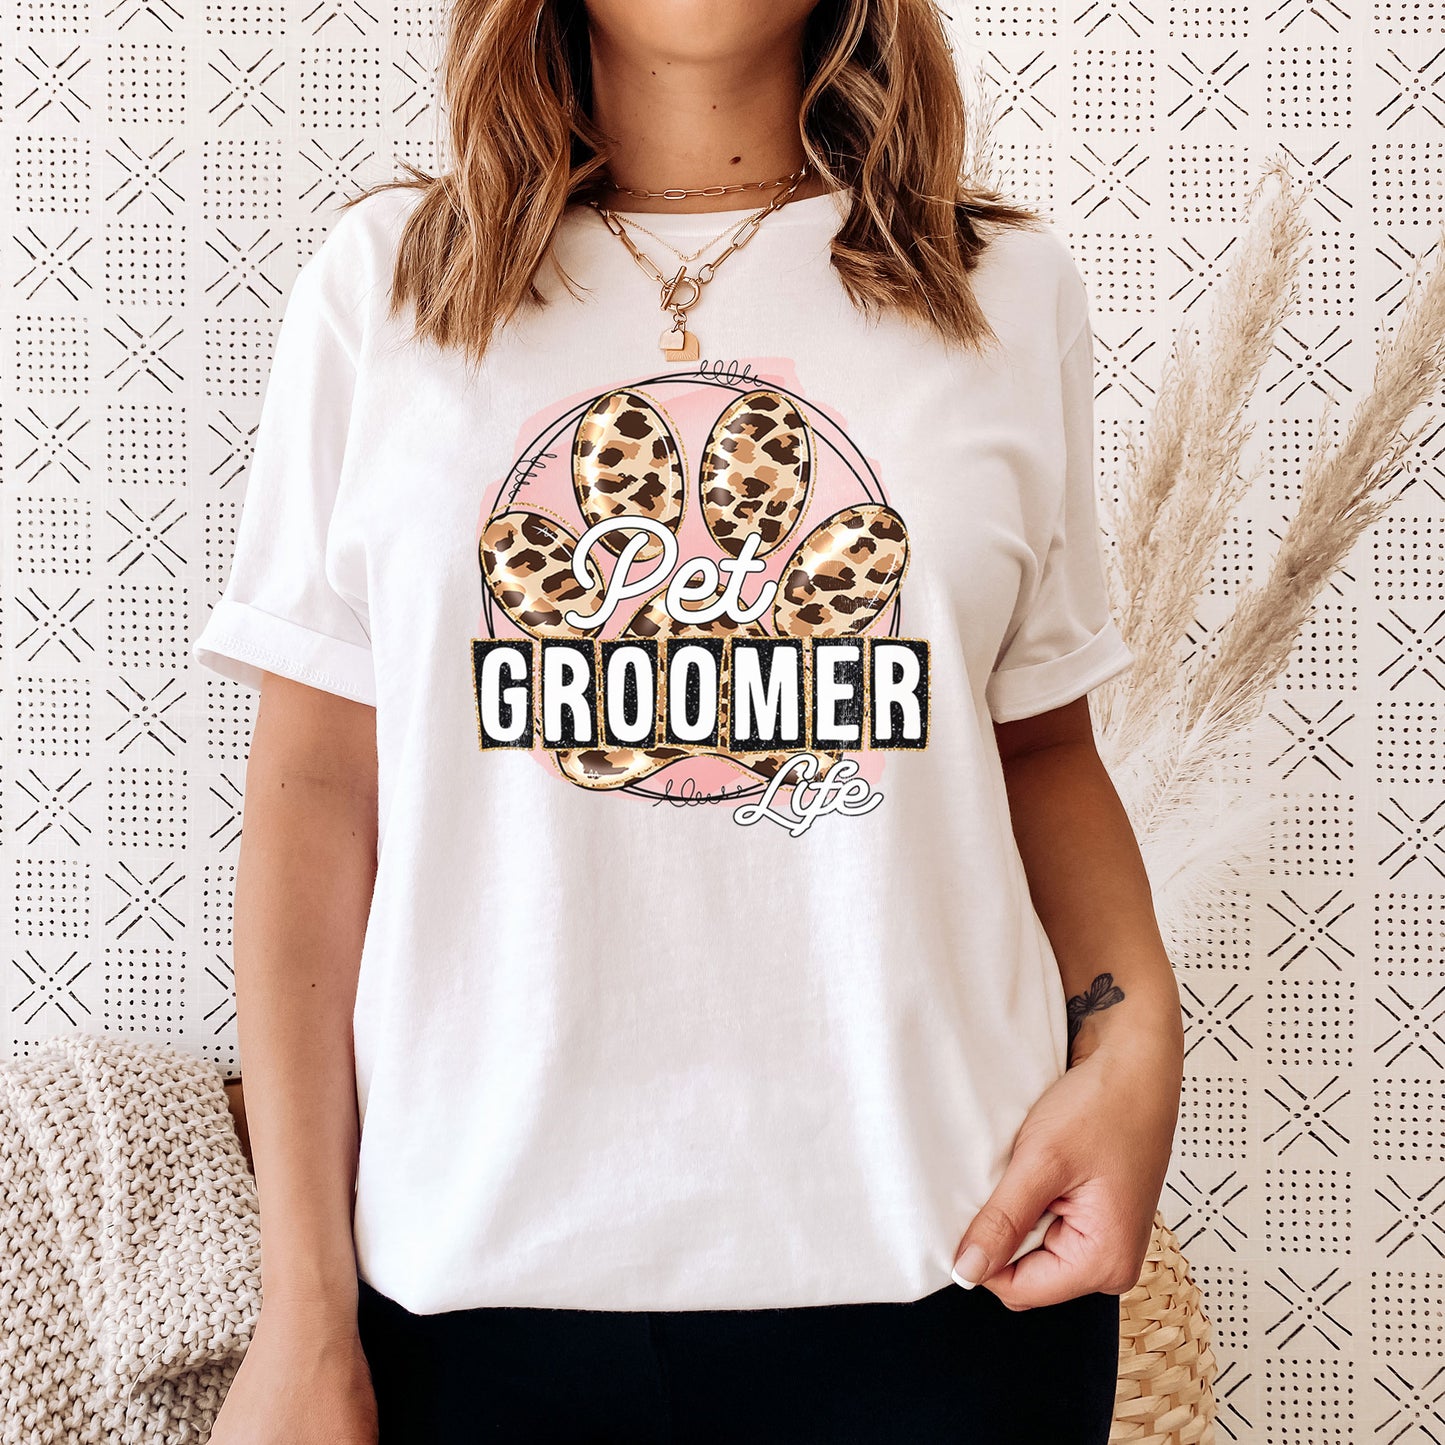 Pet Groomer Life - Leopard Funny Sayings - Dog Lovers Shirt